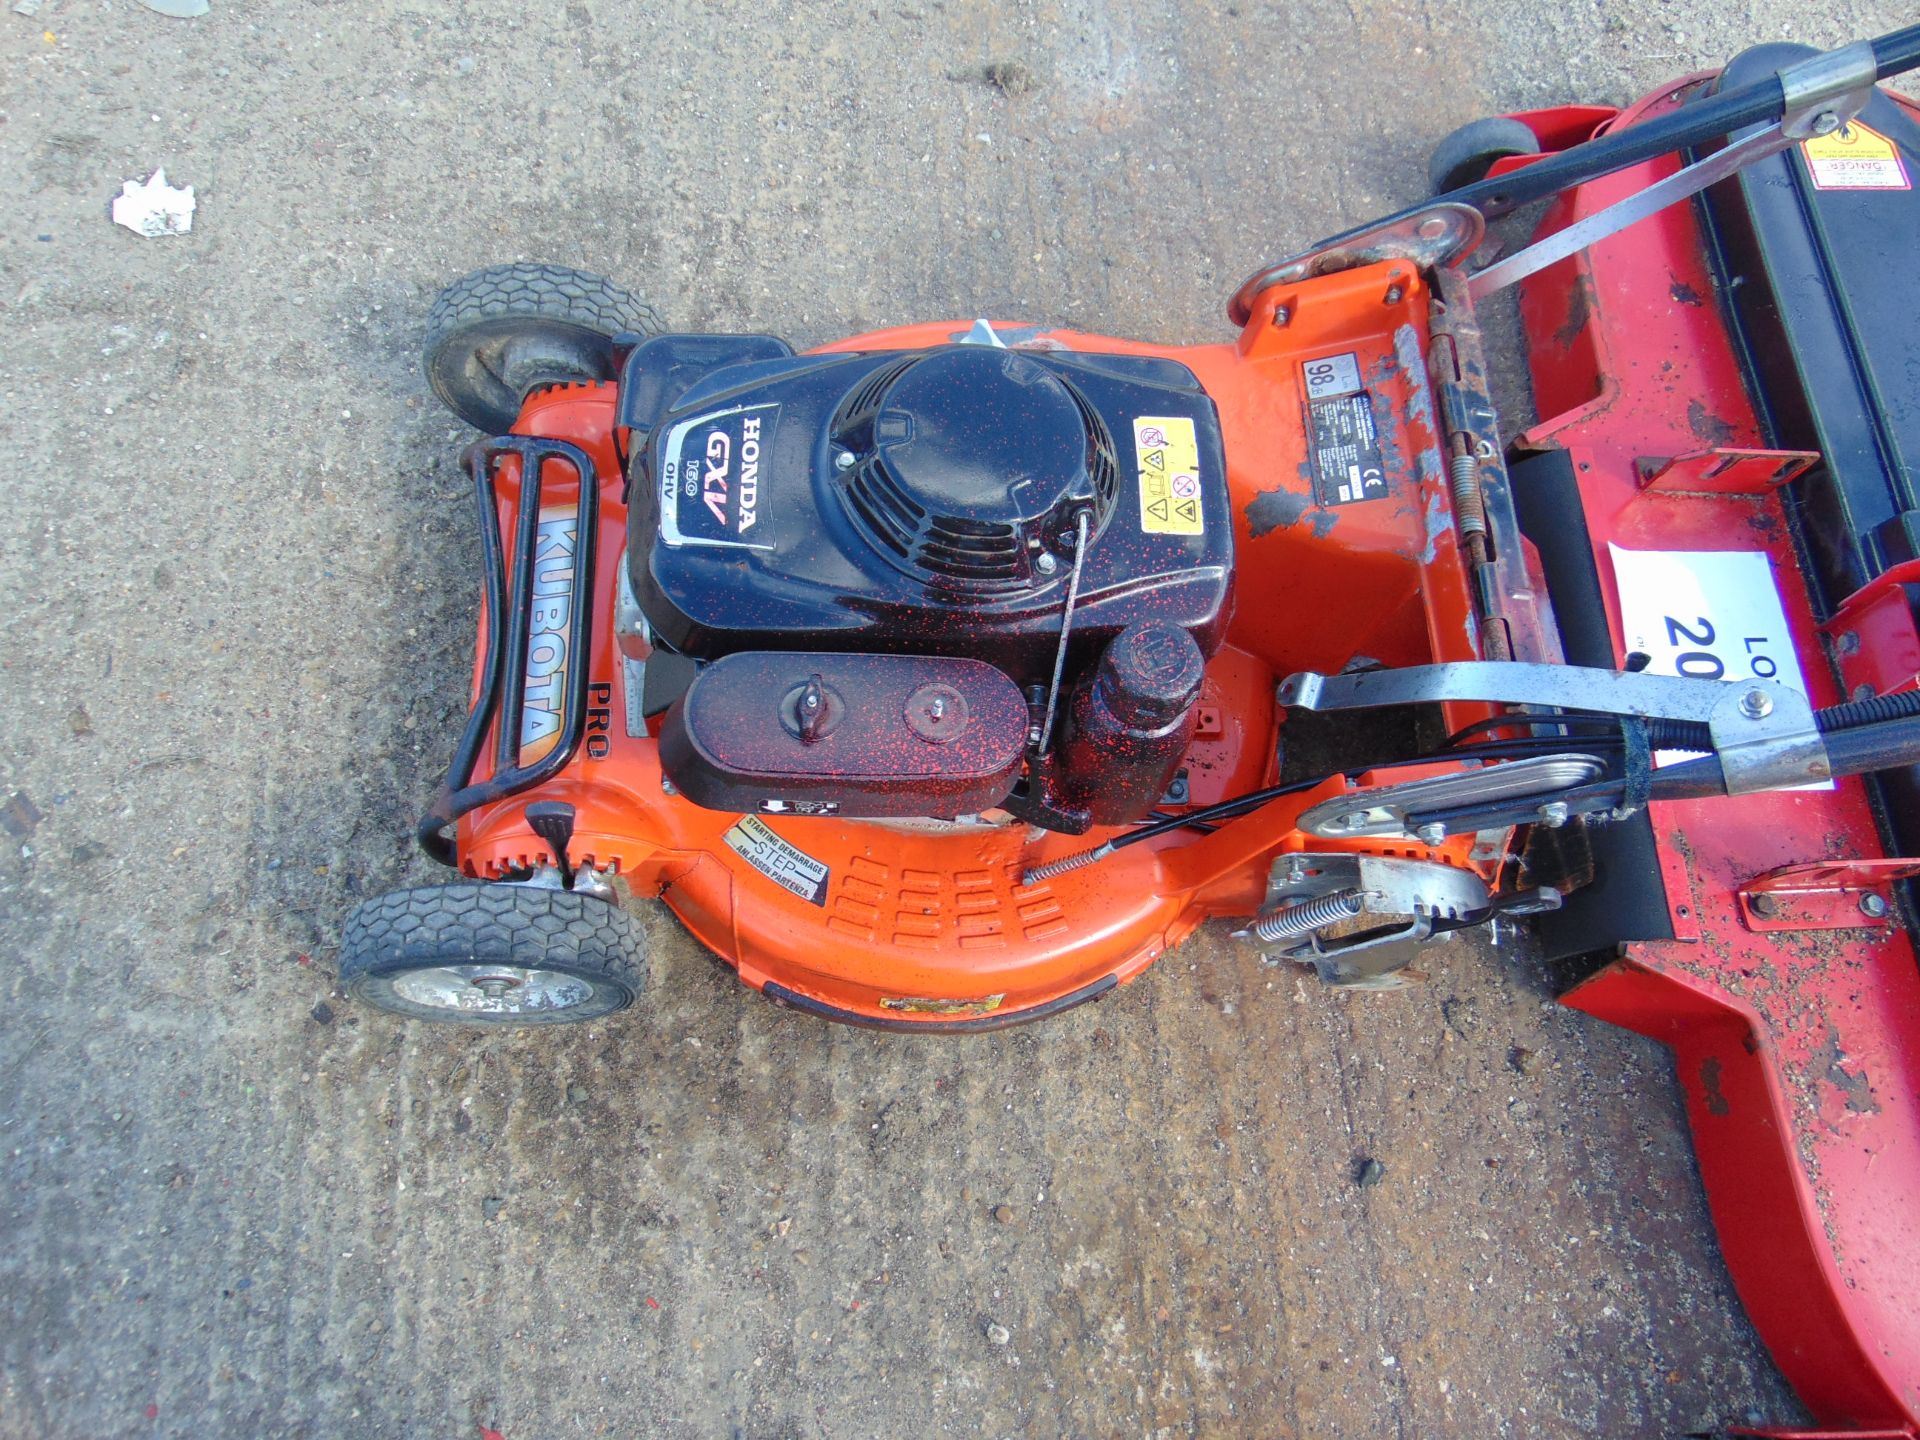 KUBOTA MOWER PLUS COUNTAX 48 INCHES MOWER DECK FROM COUNTY COUNCIL - Image 4 of 6